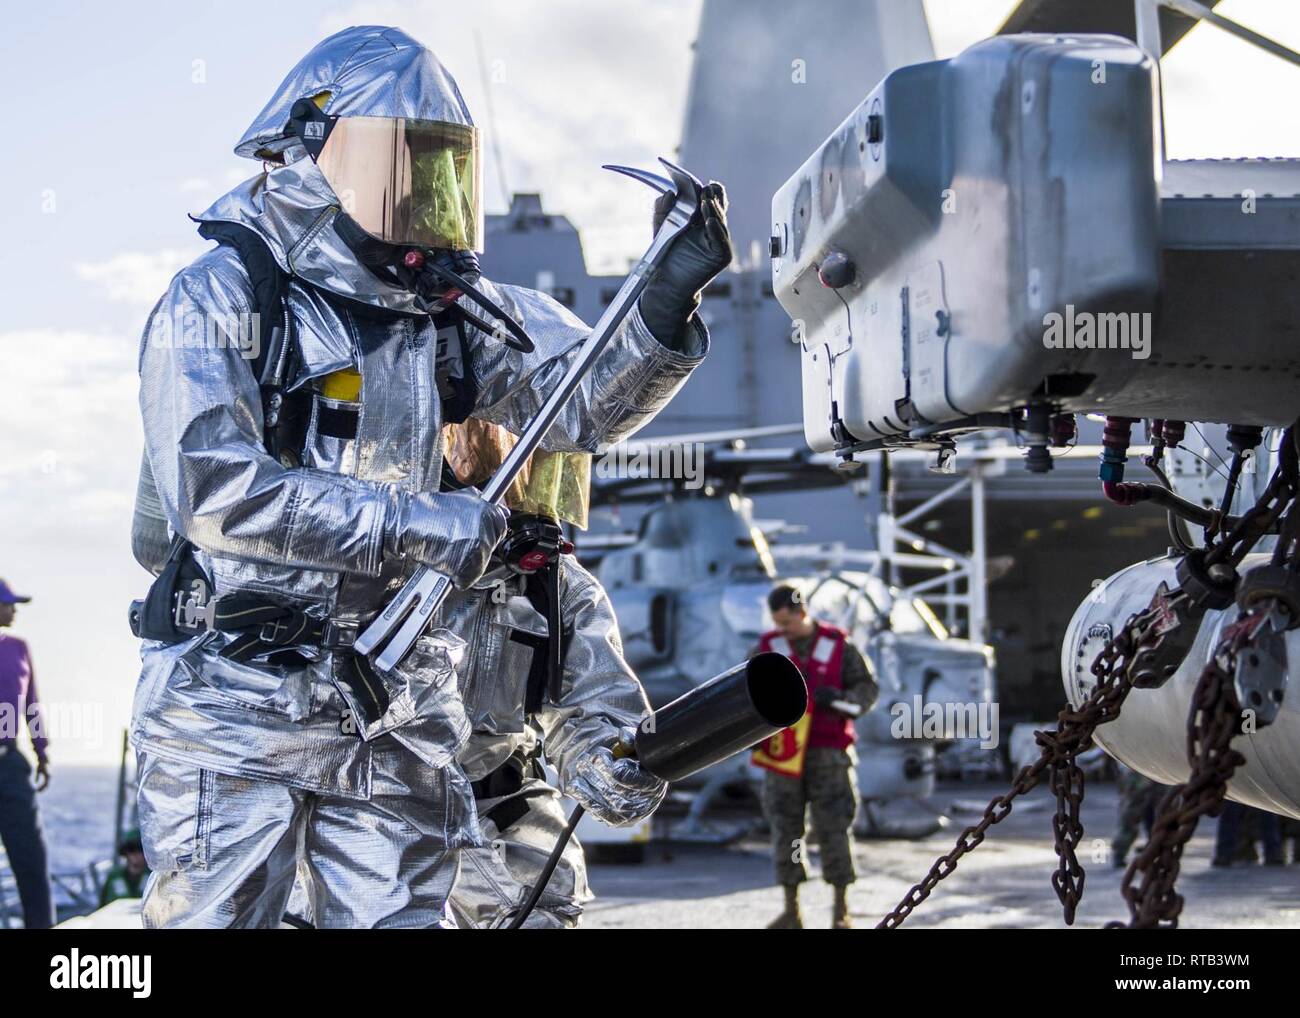 PACIFIC OCEAN (Feb. 6, 2019) Aviation Boatswain’s Mate (Handling) 3rd Class Frederick Medina, from Delano, California, searches for simulated hot spots during a flight deck fire drill aboard the San Antonio-class amphibious transport dock ship USS Anchorage (LPD 23) while on a deployment of the Essex Amphibious Ready Group (ARG) and 13th Marine Expeditionary Unit (MEU). The Essex ARG/13th MEU is a capable and lethal Navy-Marine Corps team deployed to the 7th fleet area of operations to support regional stability, reassure partners and allies and maintain a presence postured to respond to any c Stock Photo